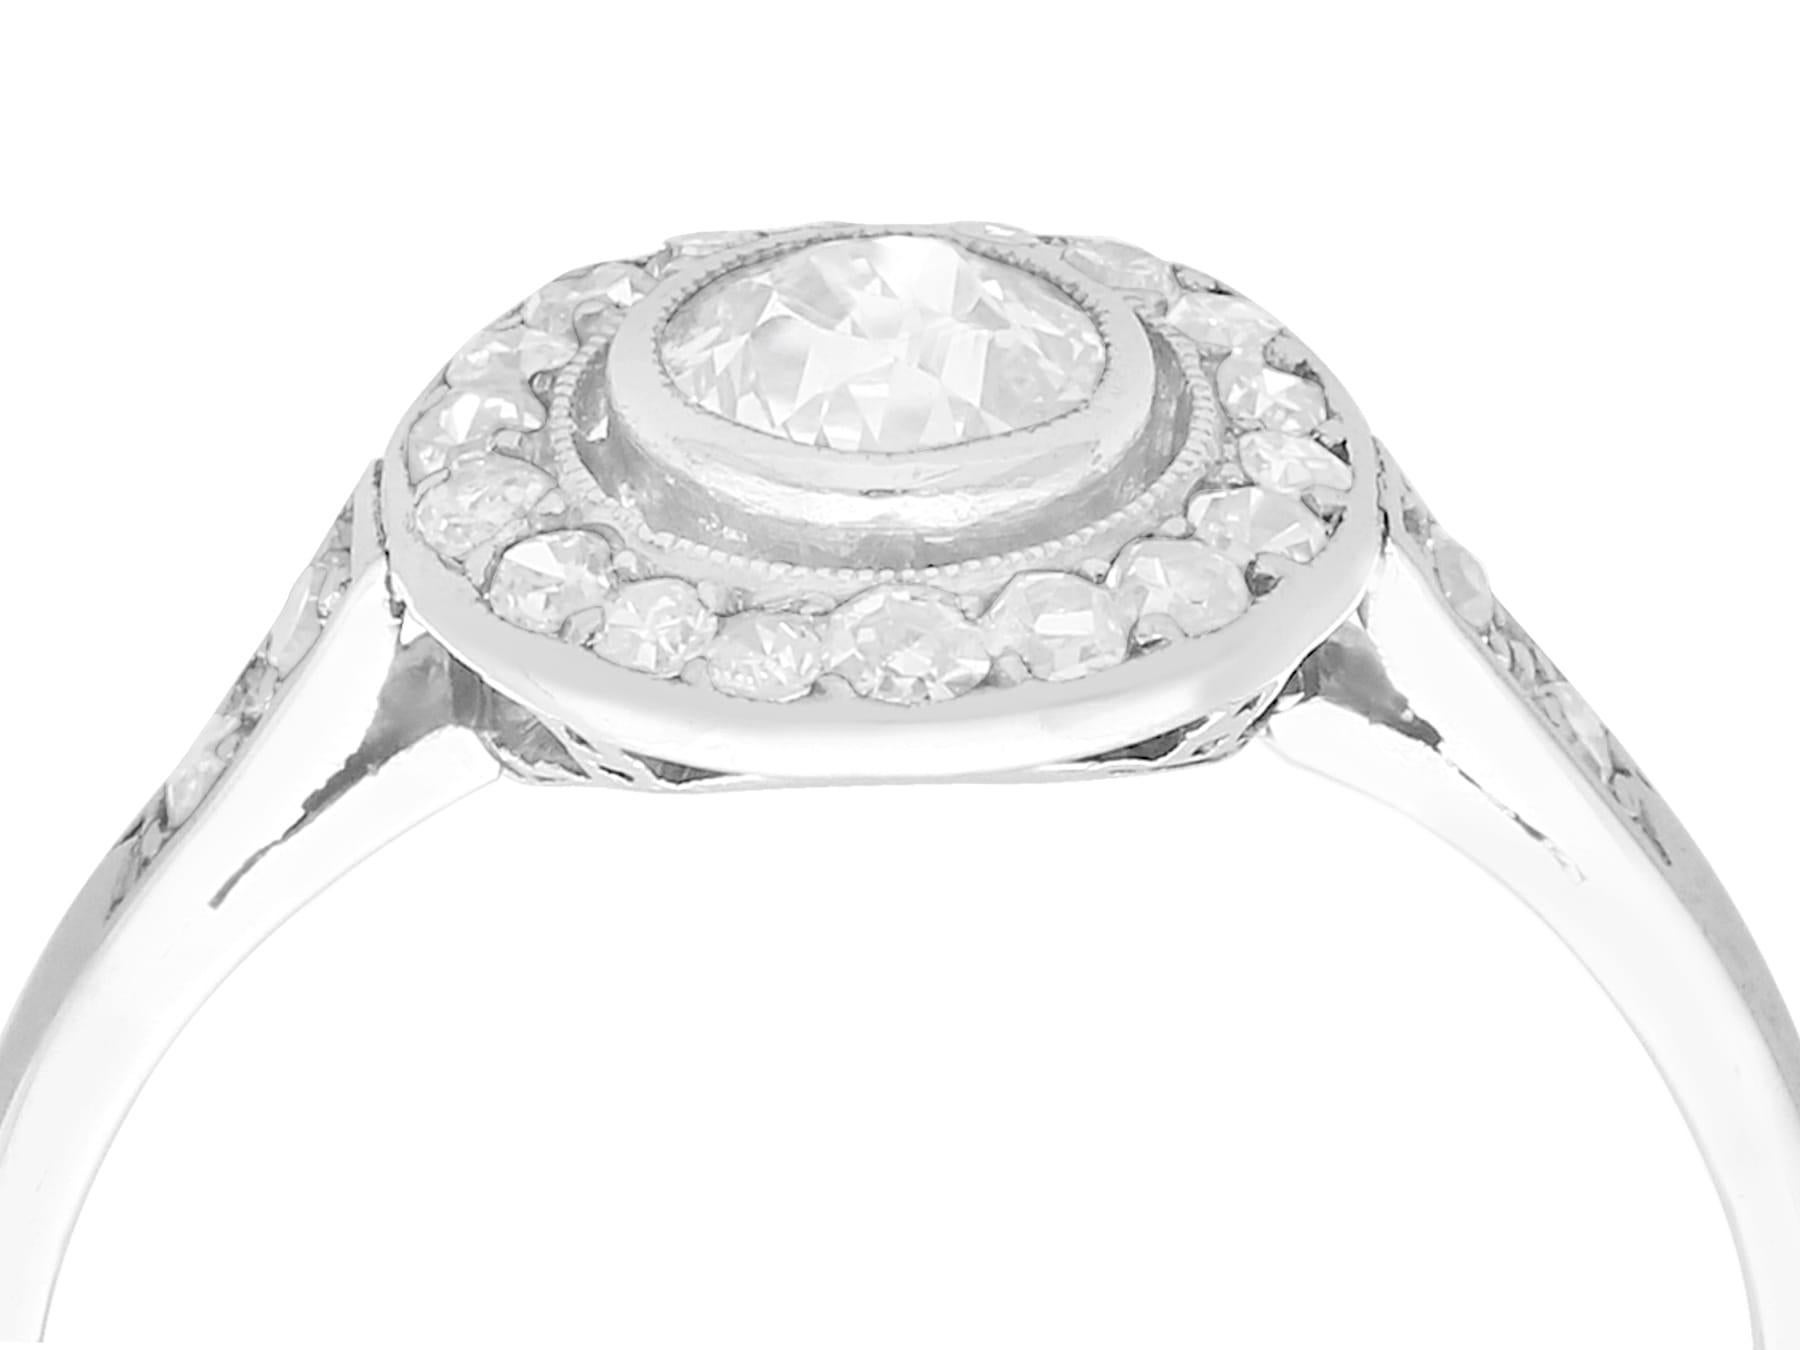 A fine and impressive antique 0.63 carat diamond and platinum cluster ring; part of our diverse antique jewelry and estate jewelry collections.

This fine and impressive diamond vintage ring has been crafted in platinum.

The millegrain decorated